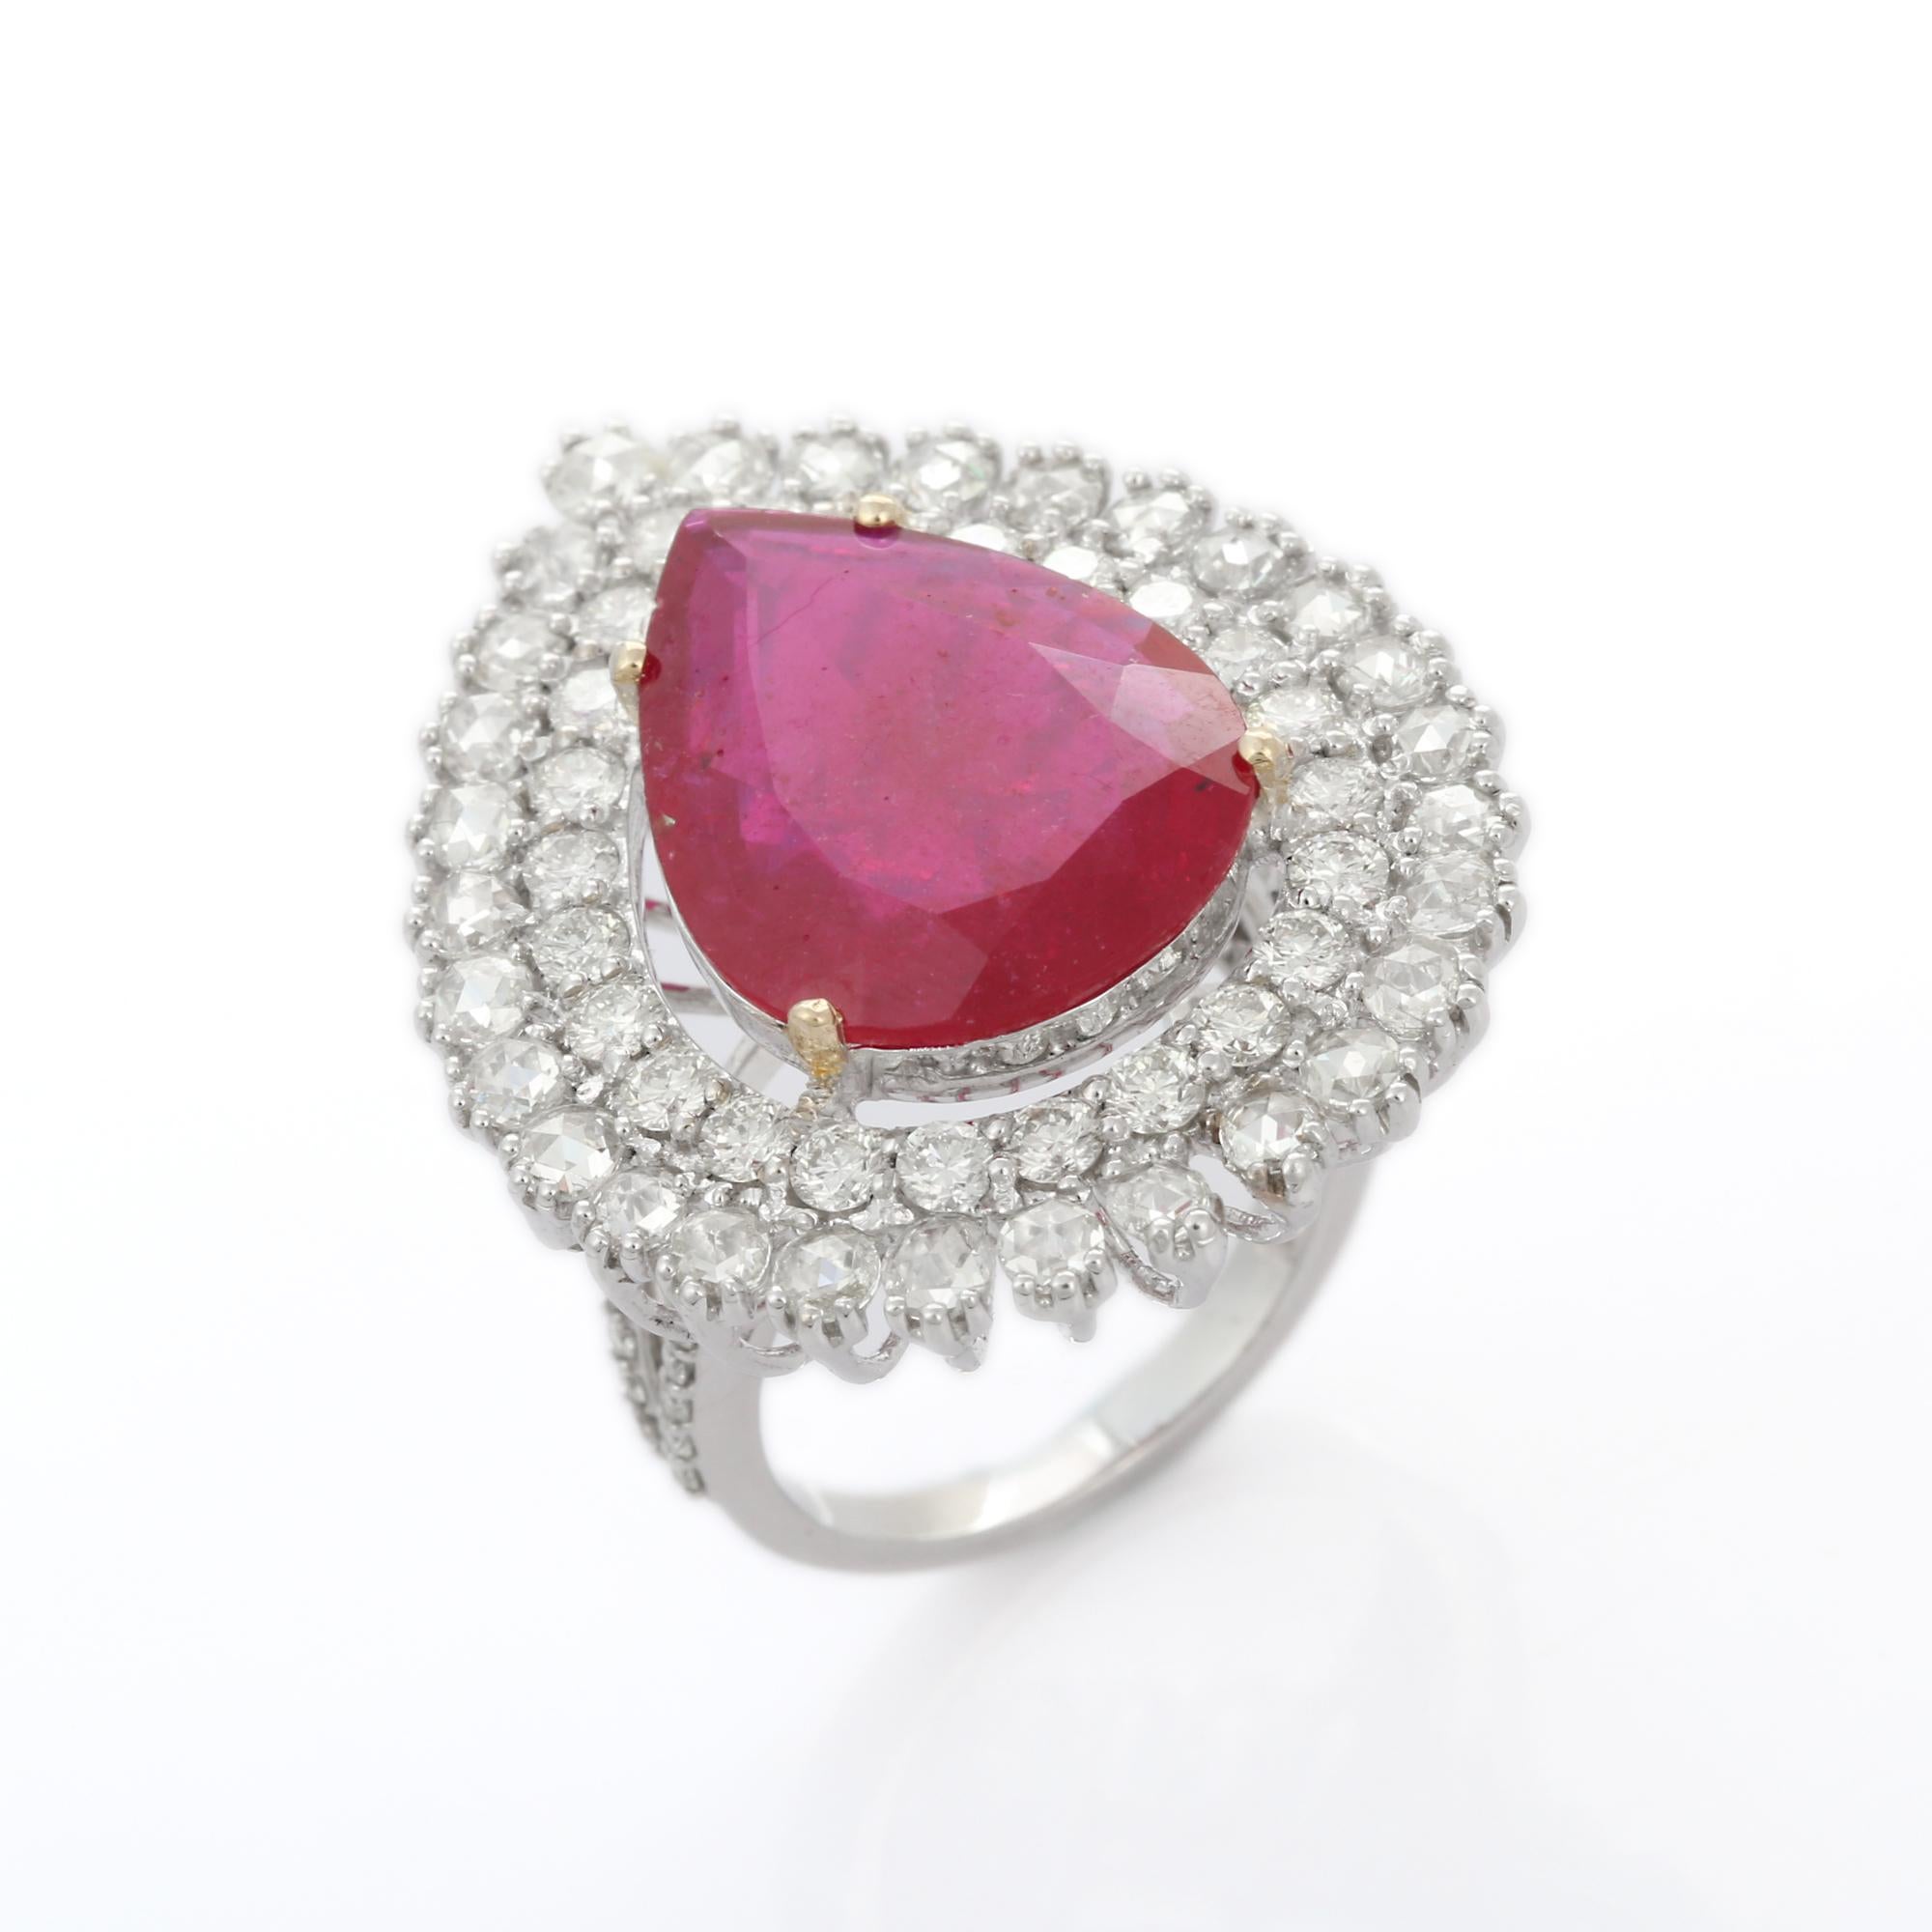 For Sale:  Vivid 9.7 Carat Ruby and Diamond Wedding Cocktail Ring in 18K Solid White Gold  6